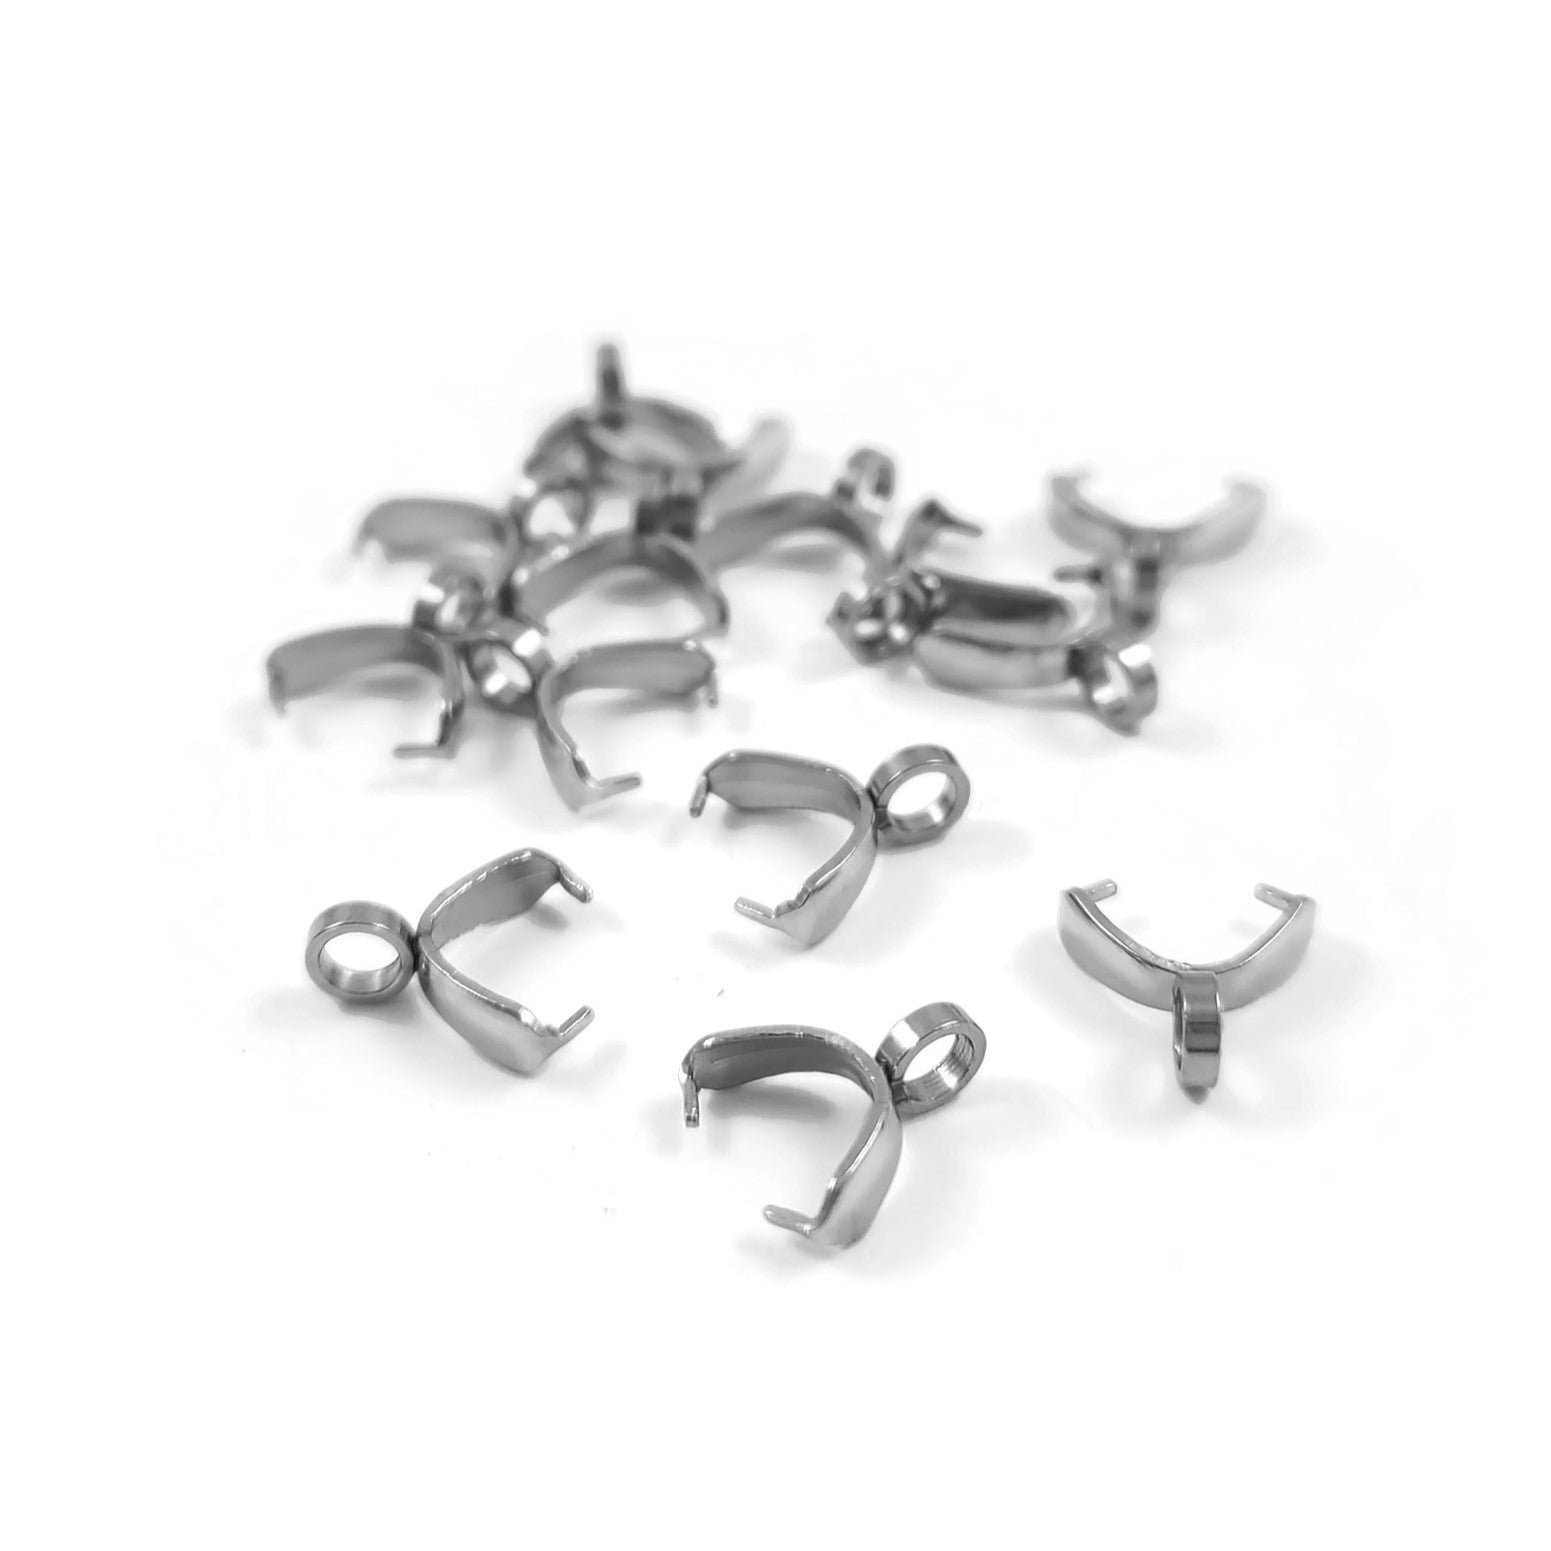 20pcs Stainless Steel Leverback Earring Hooks Hypoallergenic Ear Wires  Earring Hooks with Beaded Chains Pinch Bail Clasps for DIY Earrings Jewelry